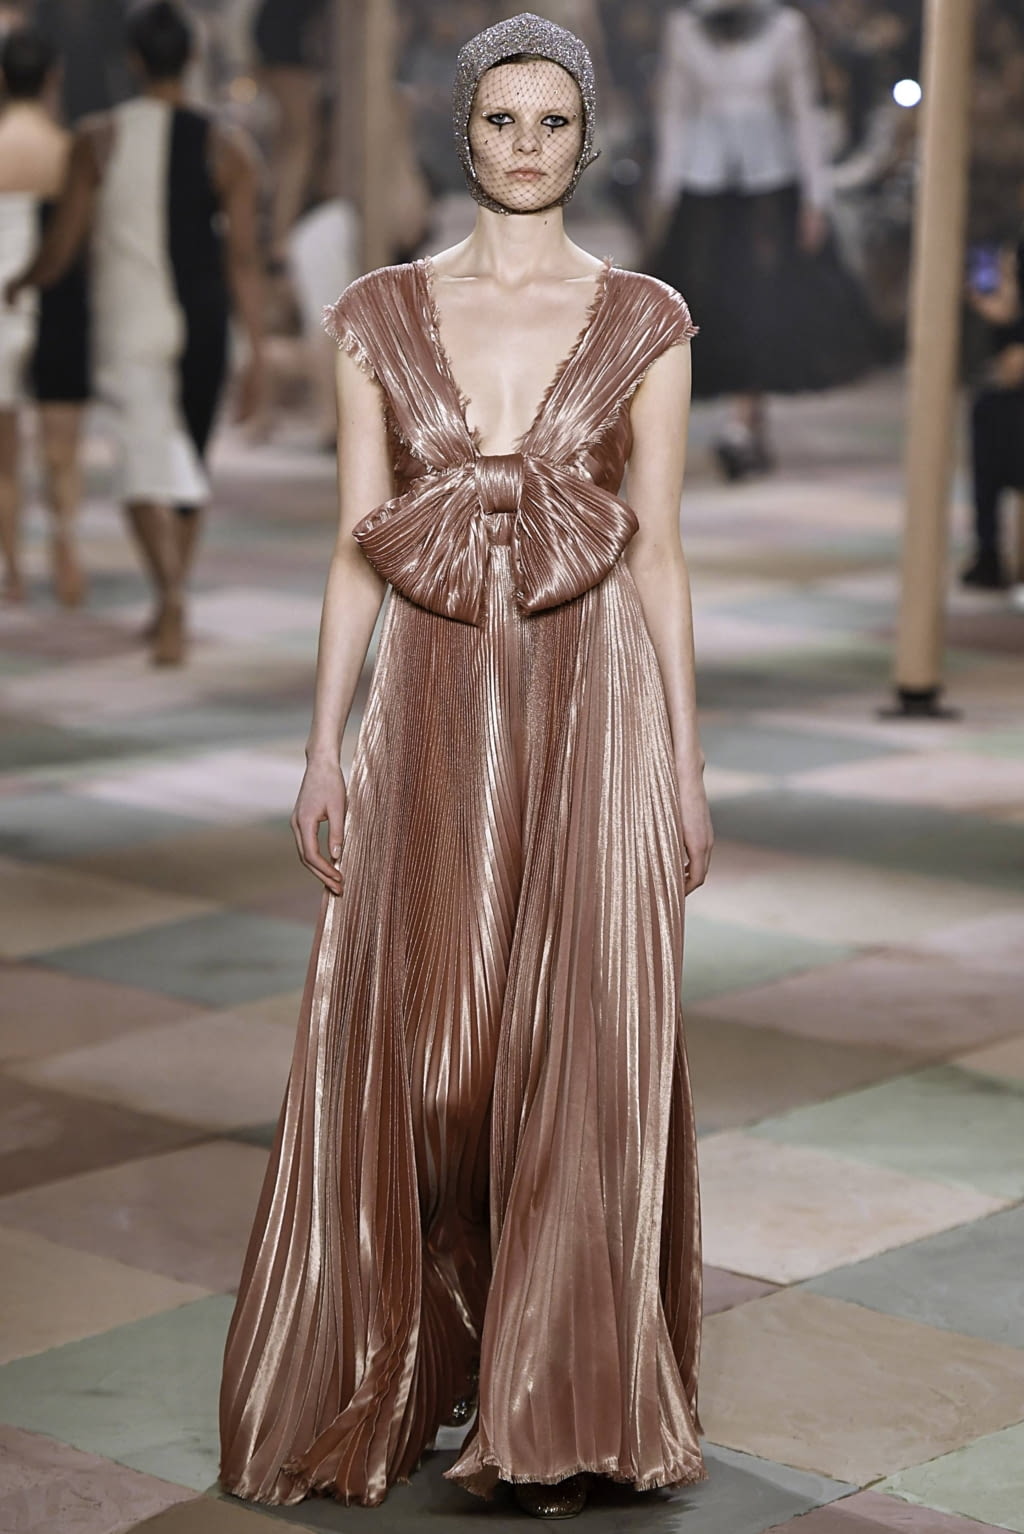 CHRISTIAN DIOR SPRING 2020 COUTURE COLLECTION PFW - Arc Street Journal